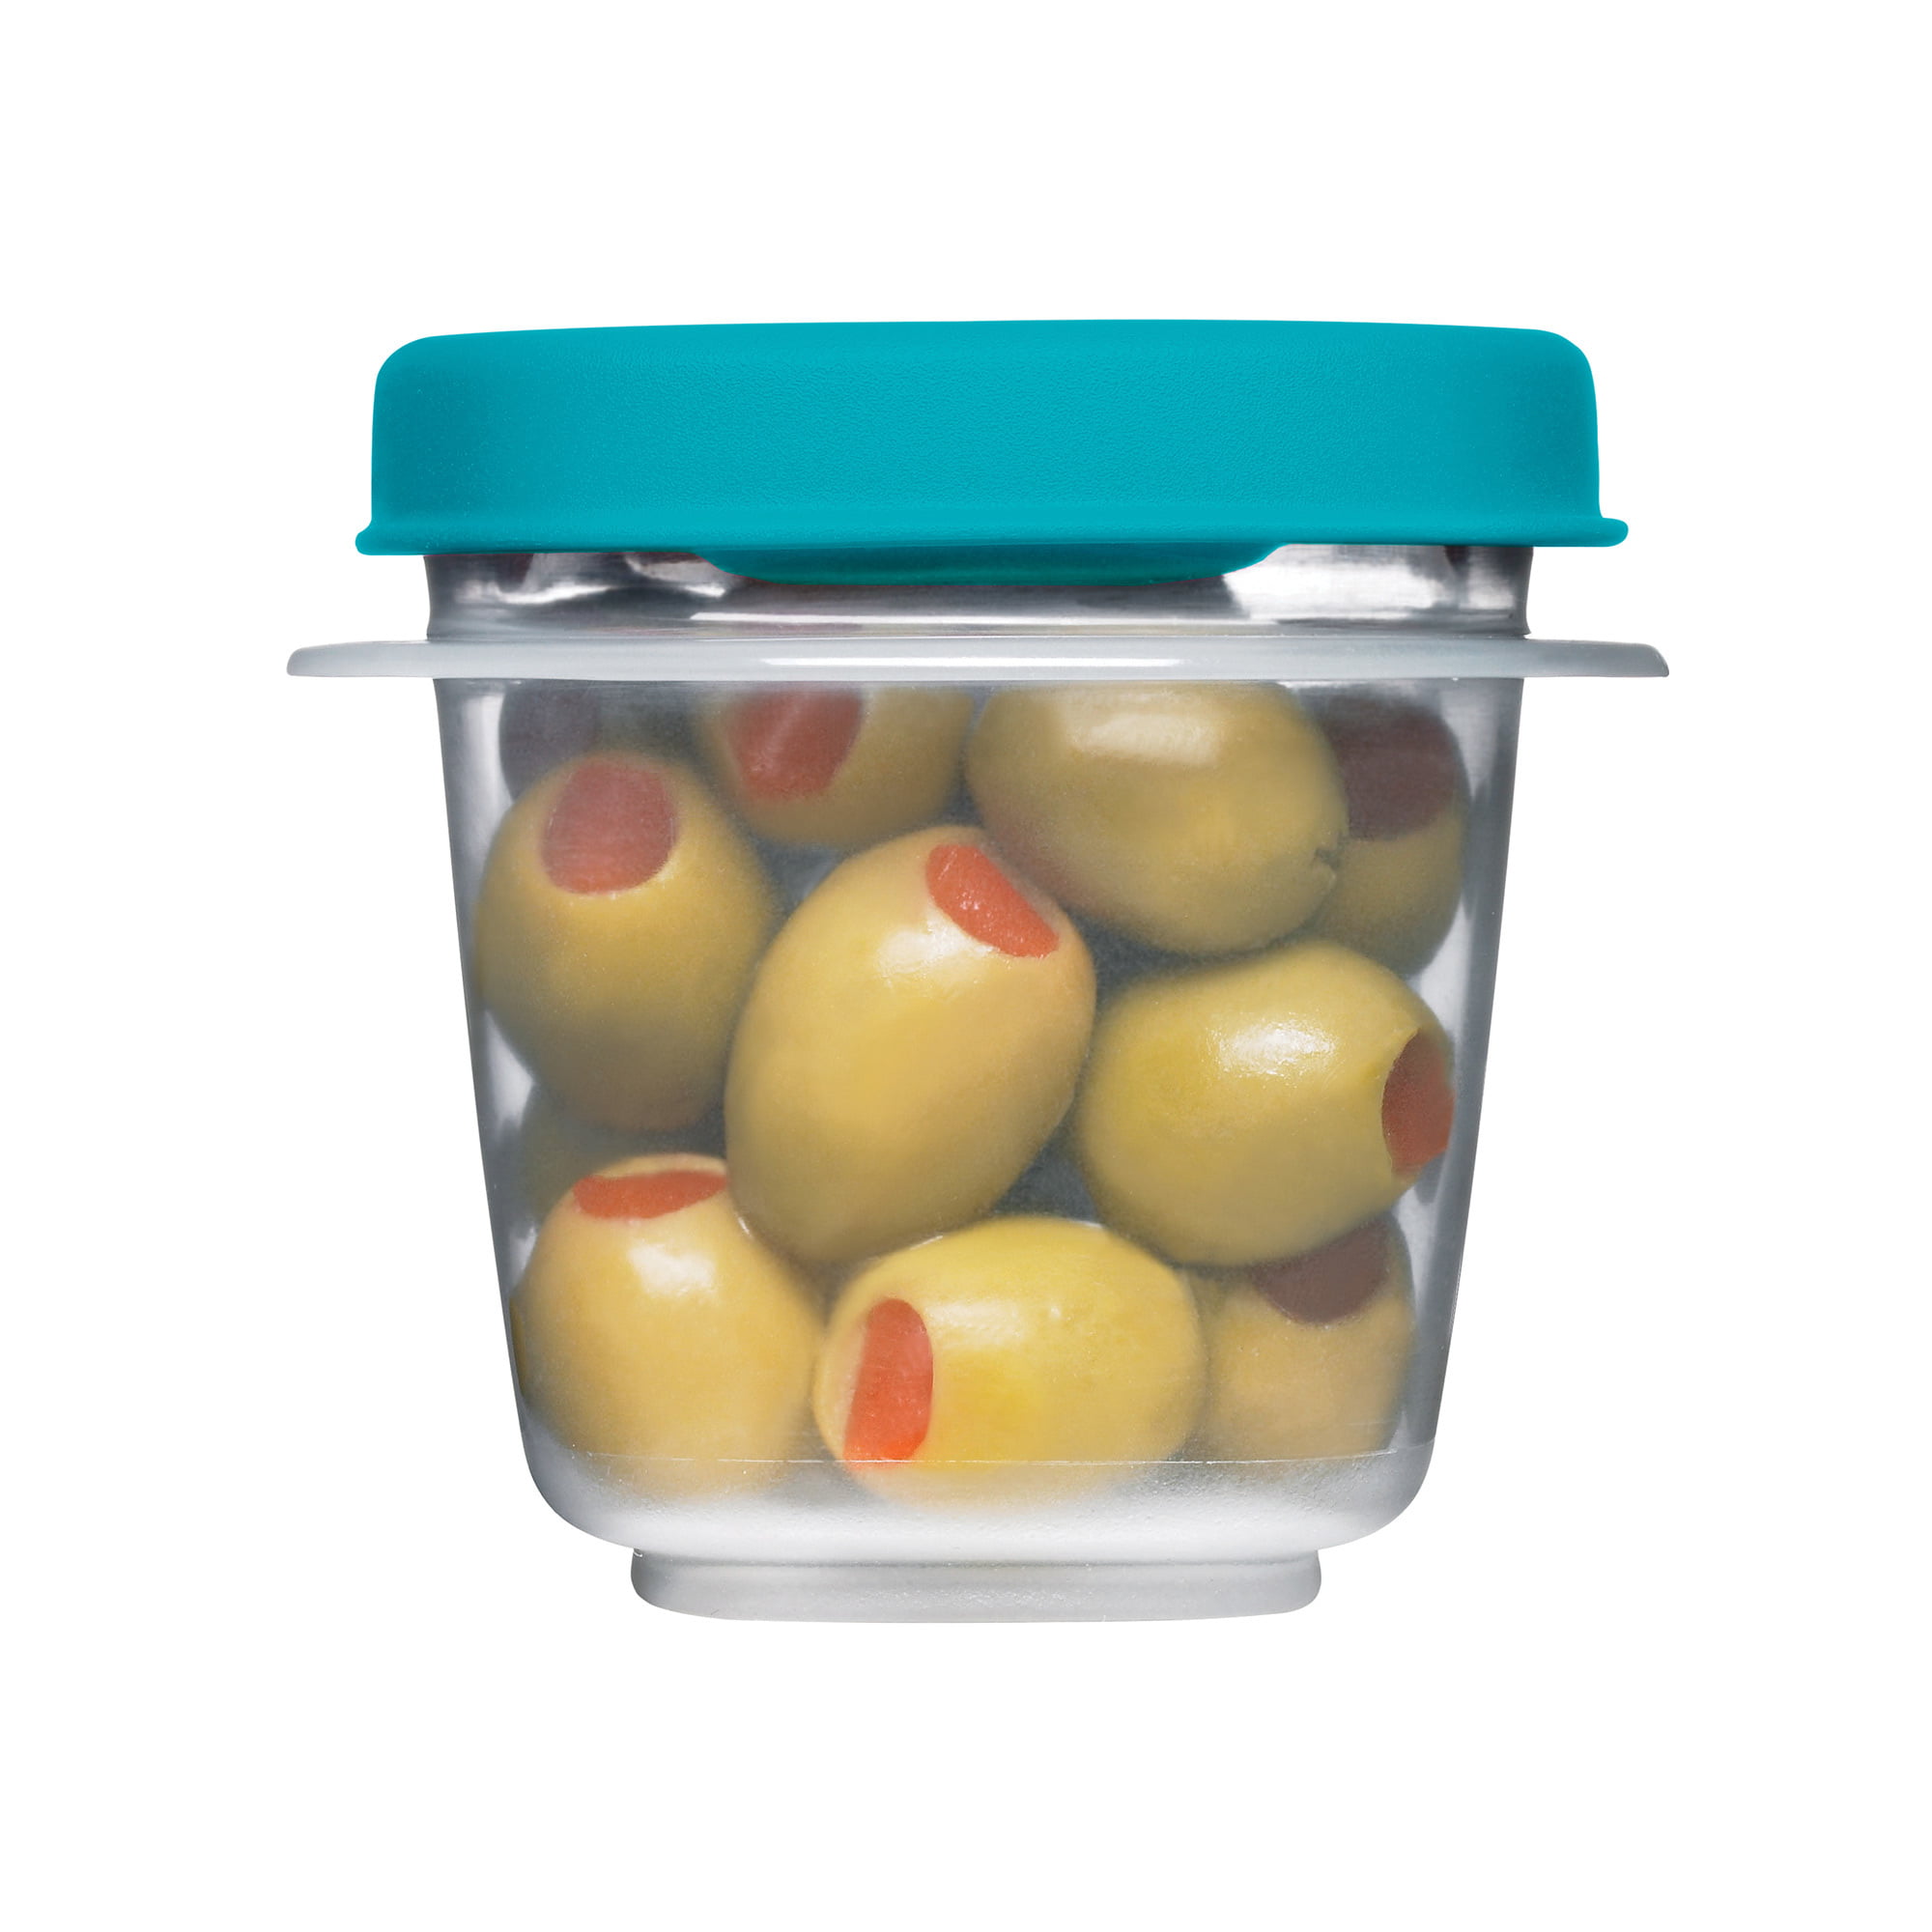 Rubbermaid® Easy Find Lids Food Storage Containers, 18 pc - Kroger